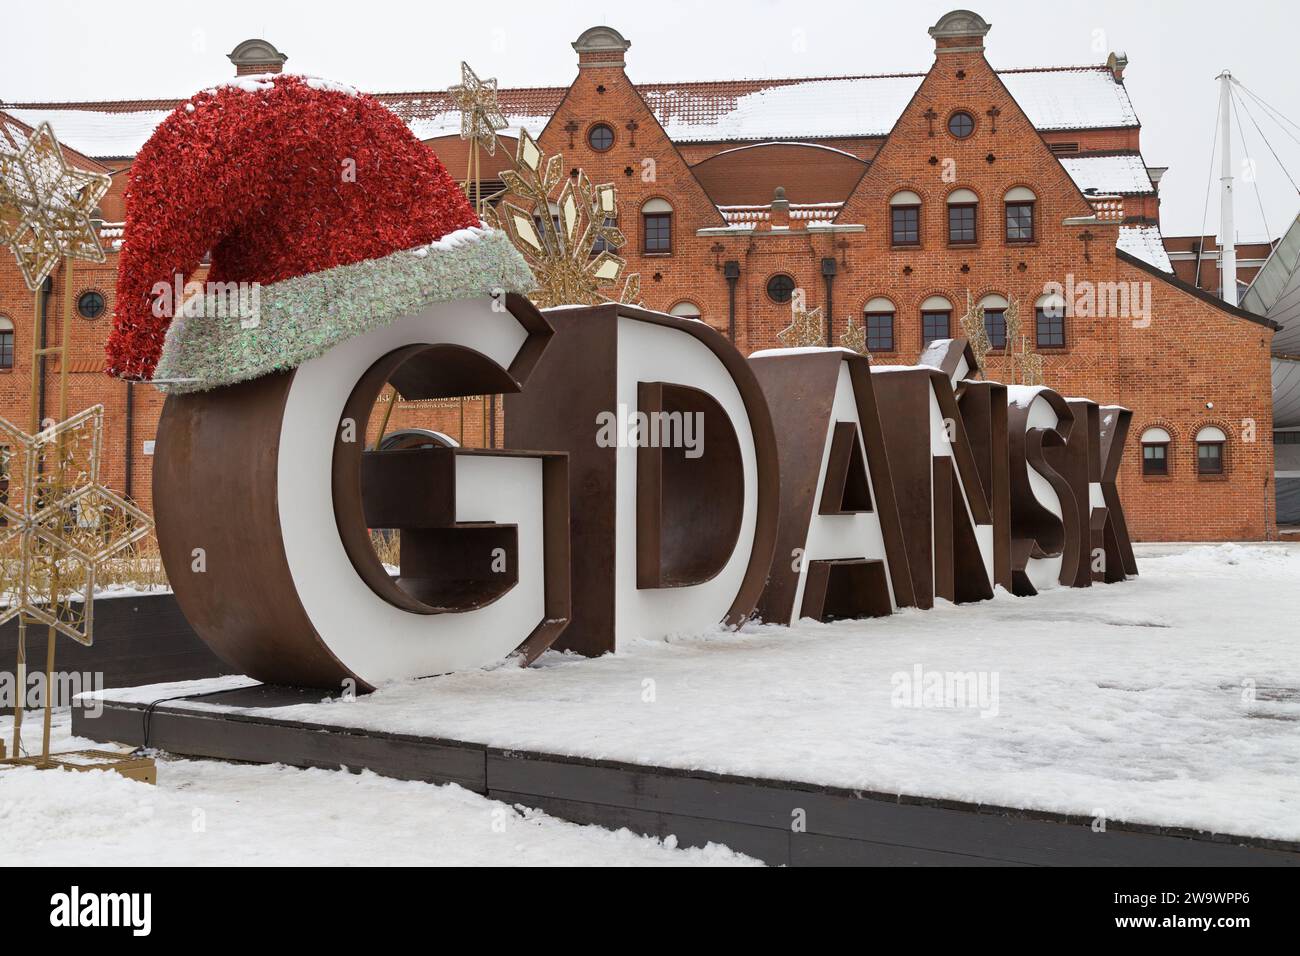 Gdansk Neon Sign in front of the Polish Baltic Frederic Chopin Philharmonic during Christmas, Gdansk, Poland. Stock Photo